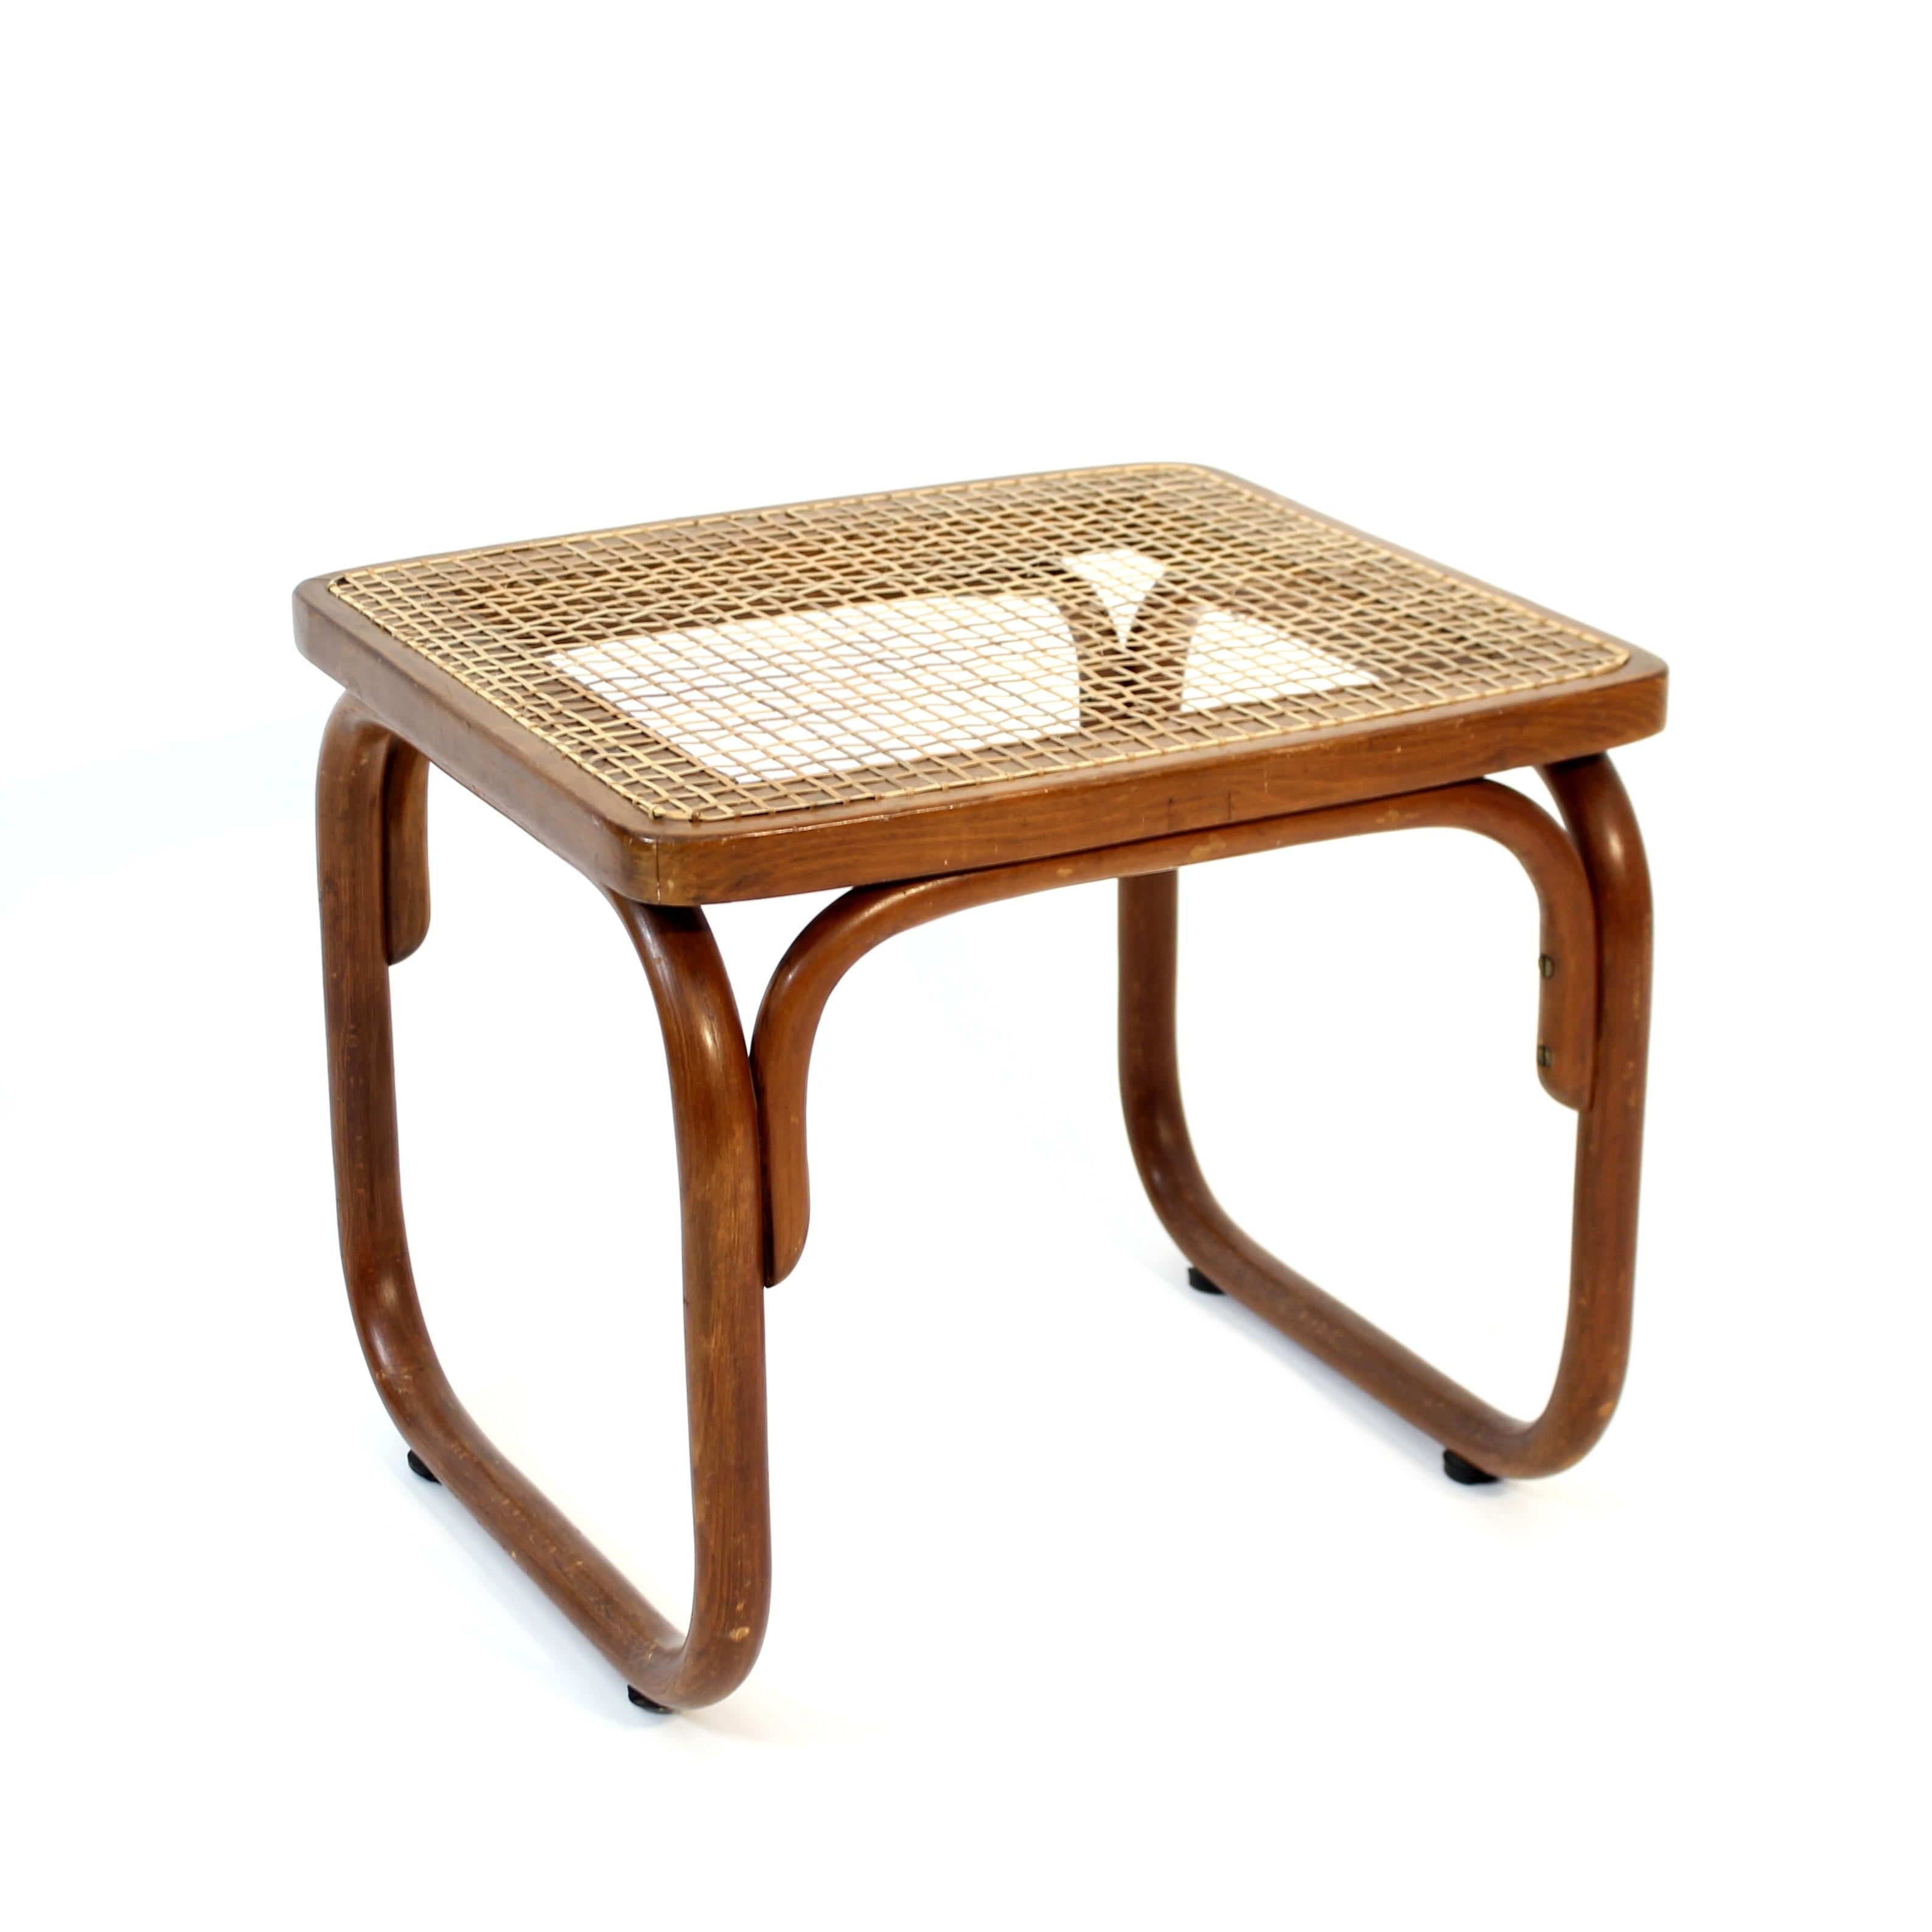 Bentwood stool, model B 313, designed by Josef Frank for Thonet-Mundus in 1928. This example have an (for this model) unusual rattan seat. Possibly a later addition since the holes of an earlier upholstery is still appears on the underside of the